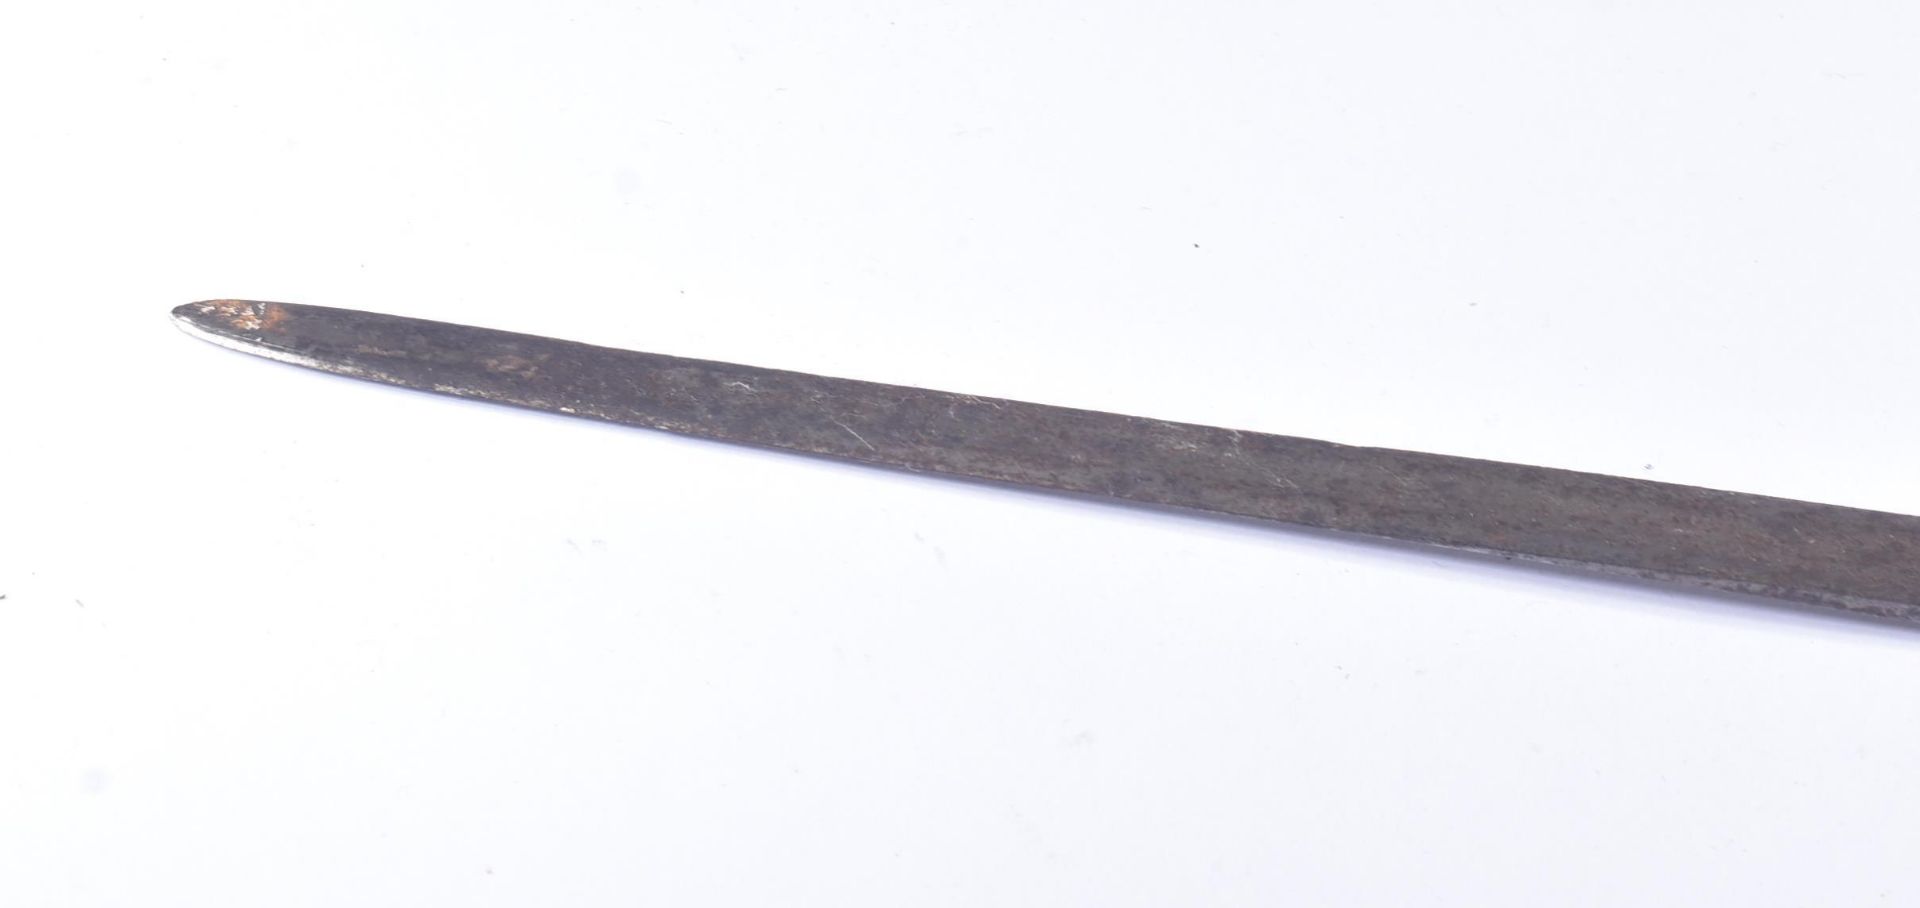 EARLY 19TH CENTURY INFANTRY OFFICERS SWORD / SPADROON - Image 16 of 16